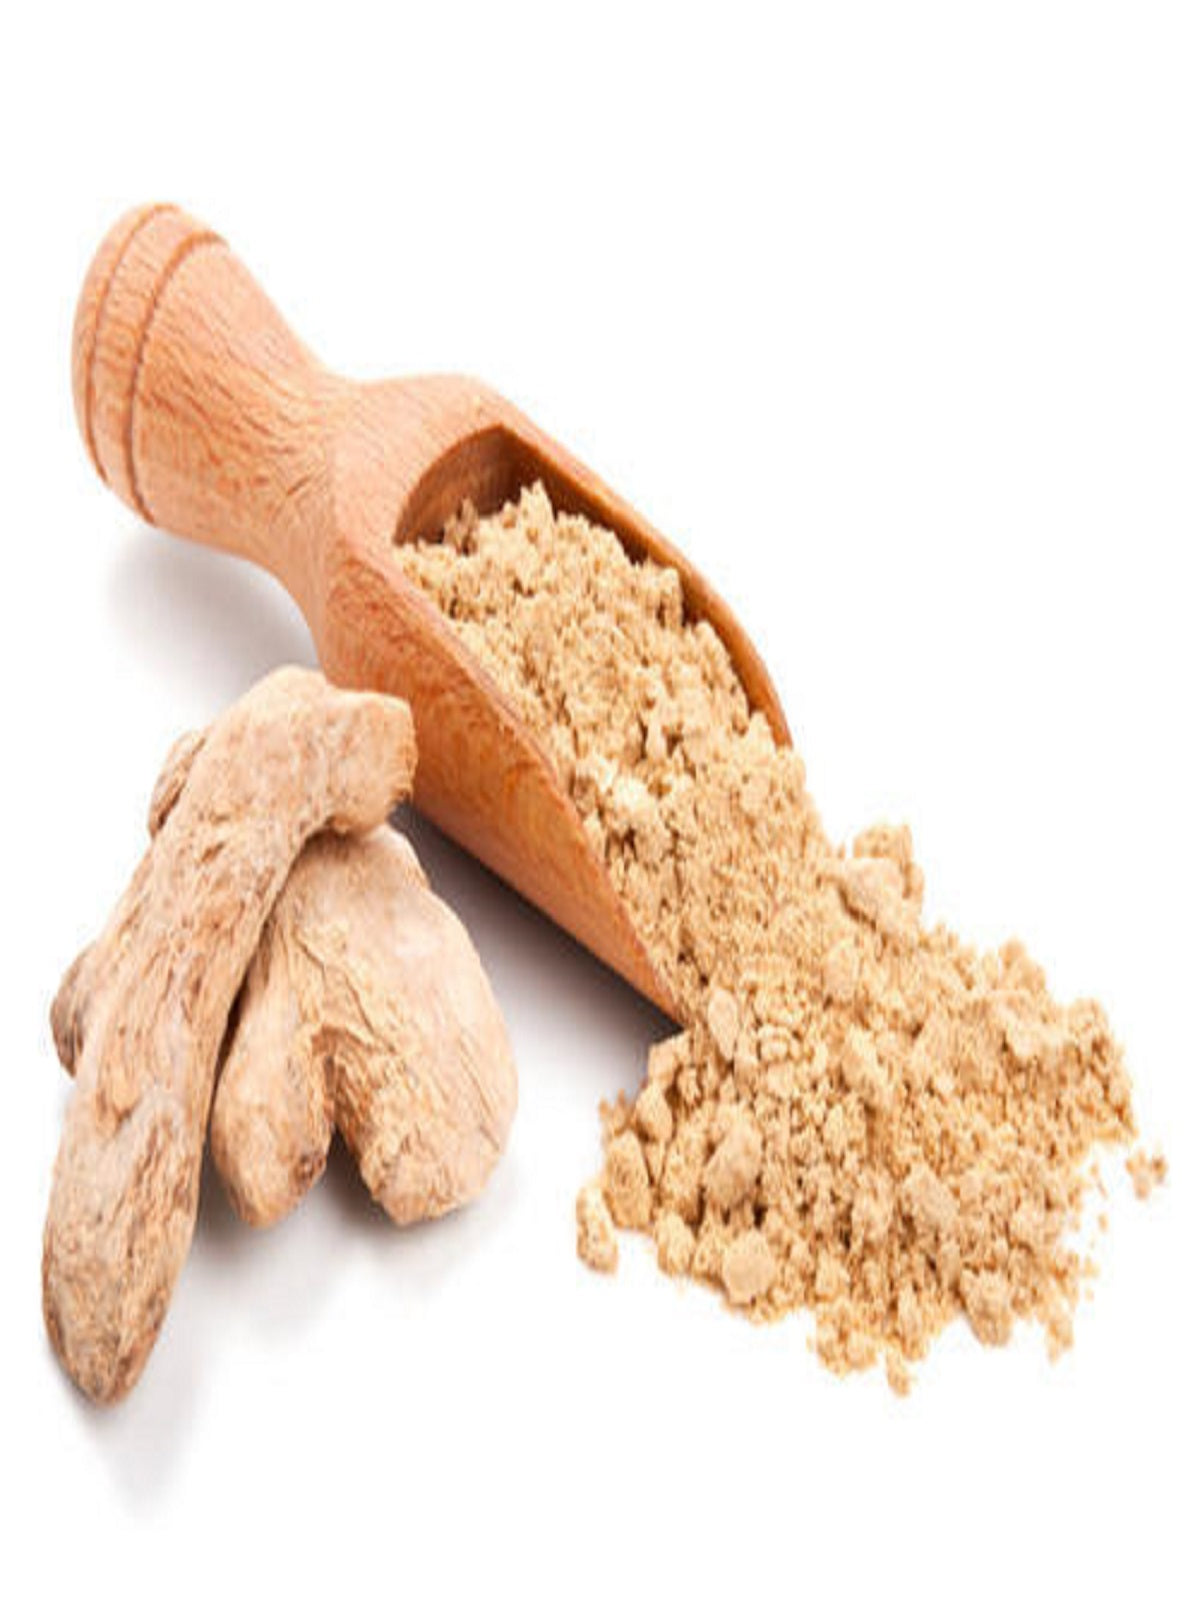 Buy the best quality Sauth powder (dry ginger powder) online at Farmonics